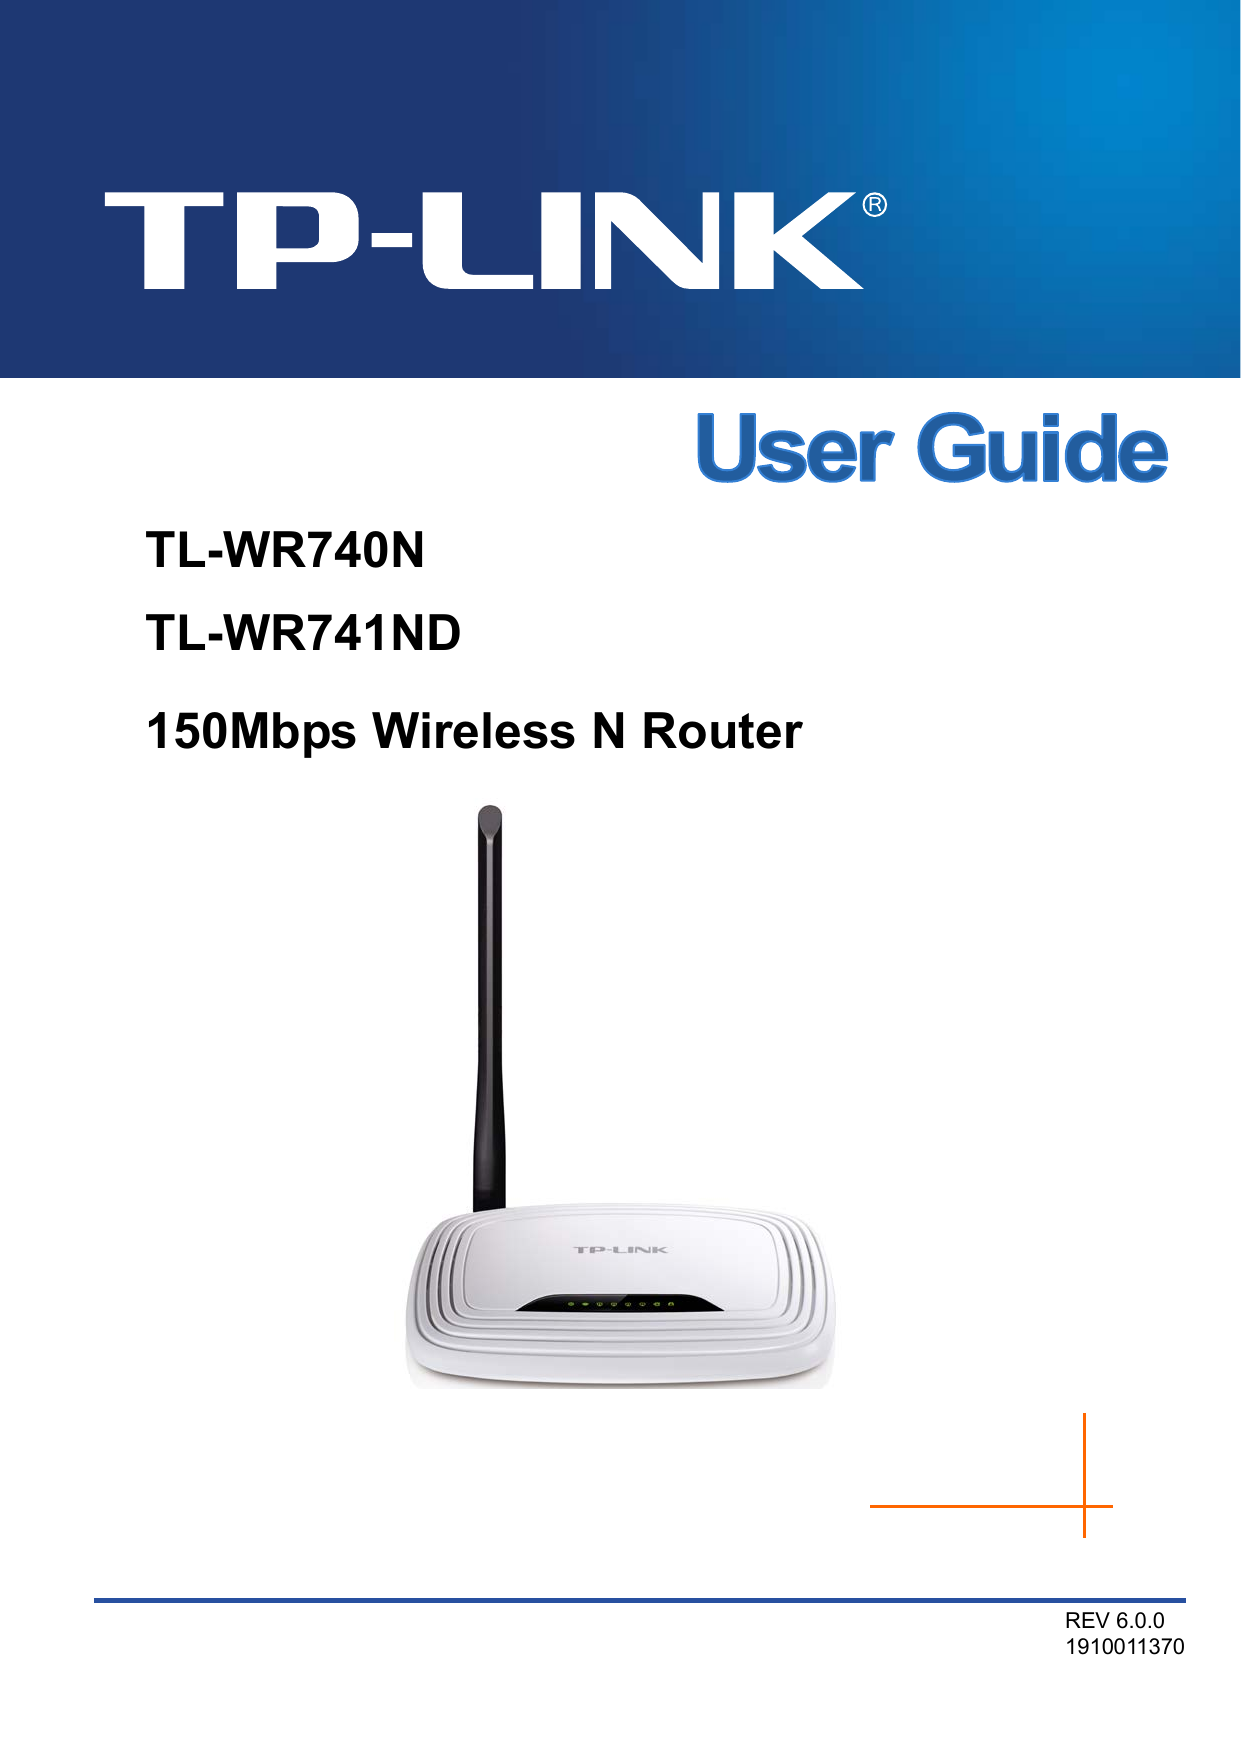   TL-WR740N TL-WR741ND 150Mbps Wireless N Router   REV 6.0.0 1910011370  